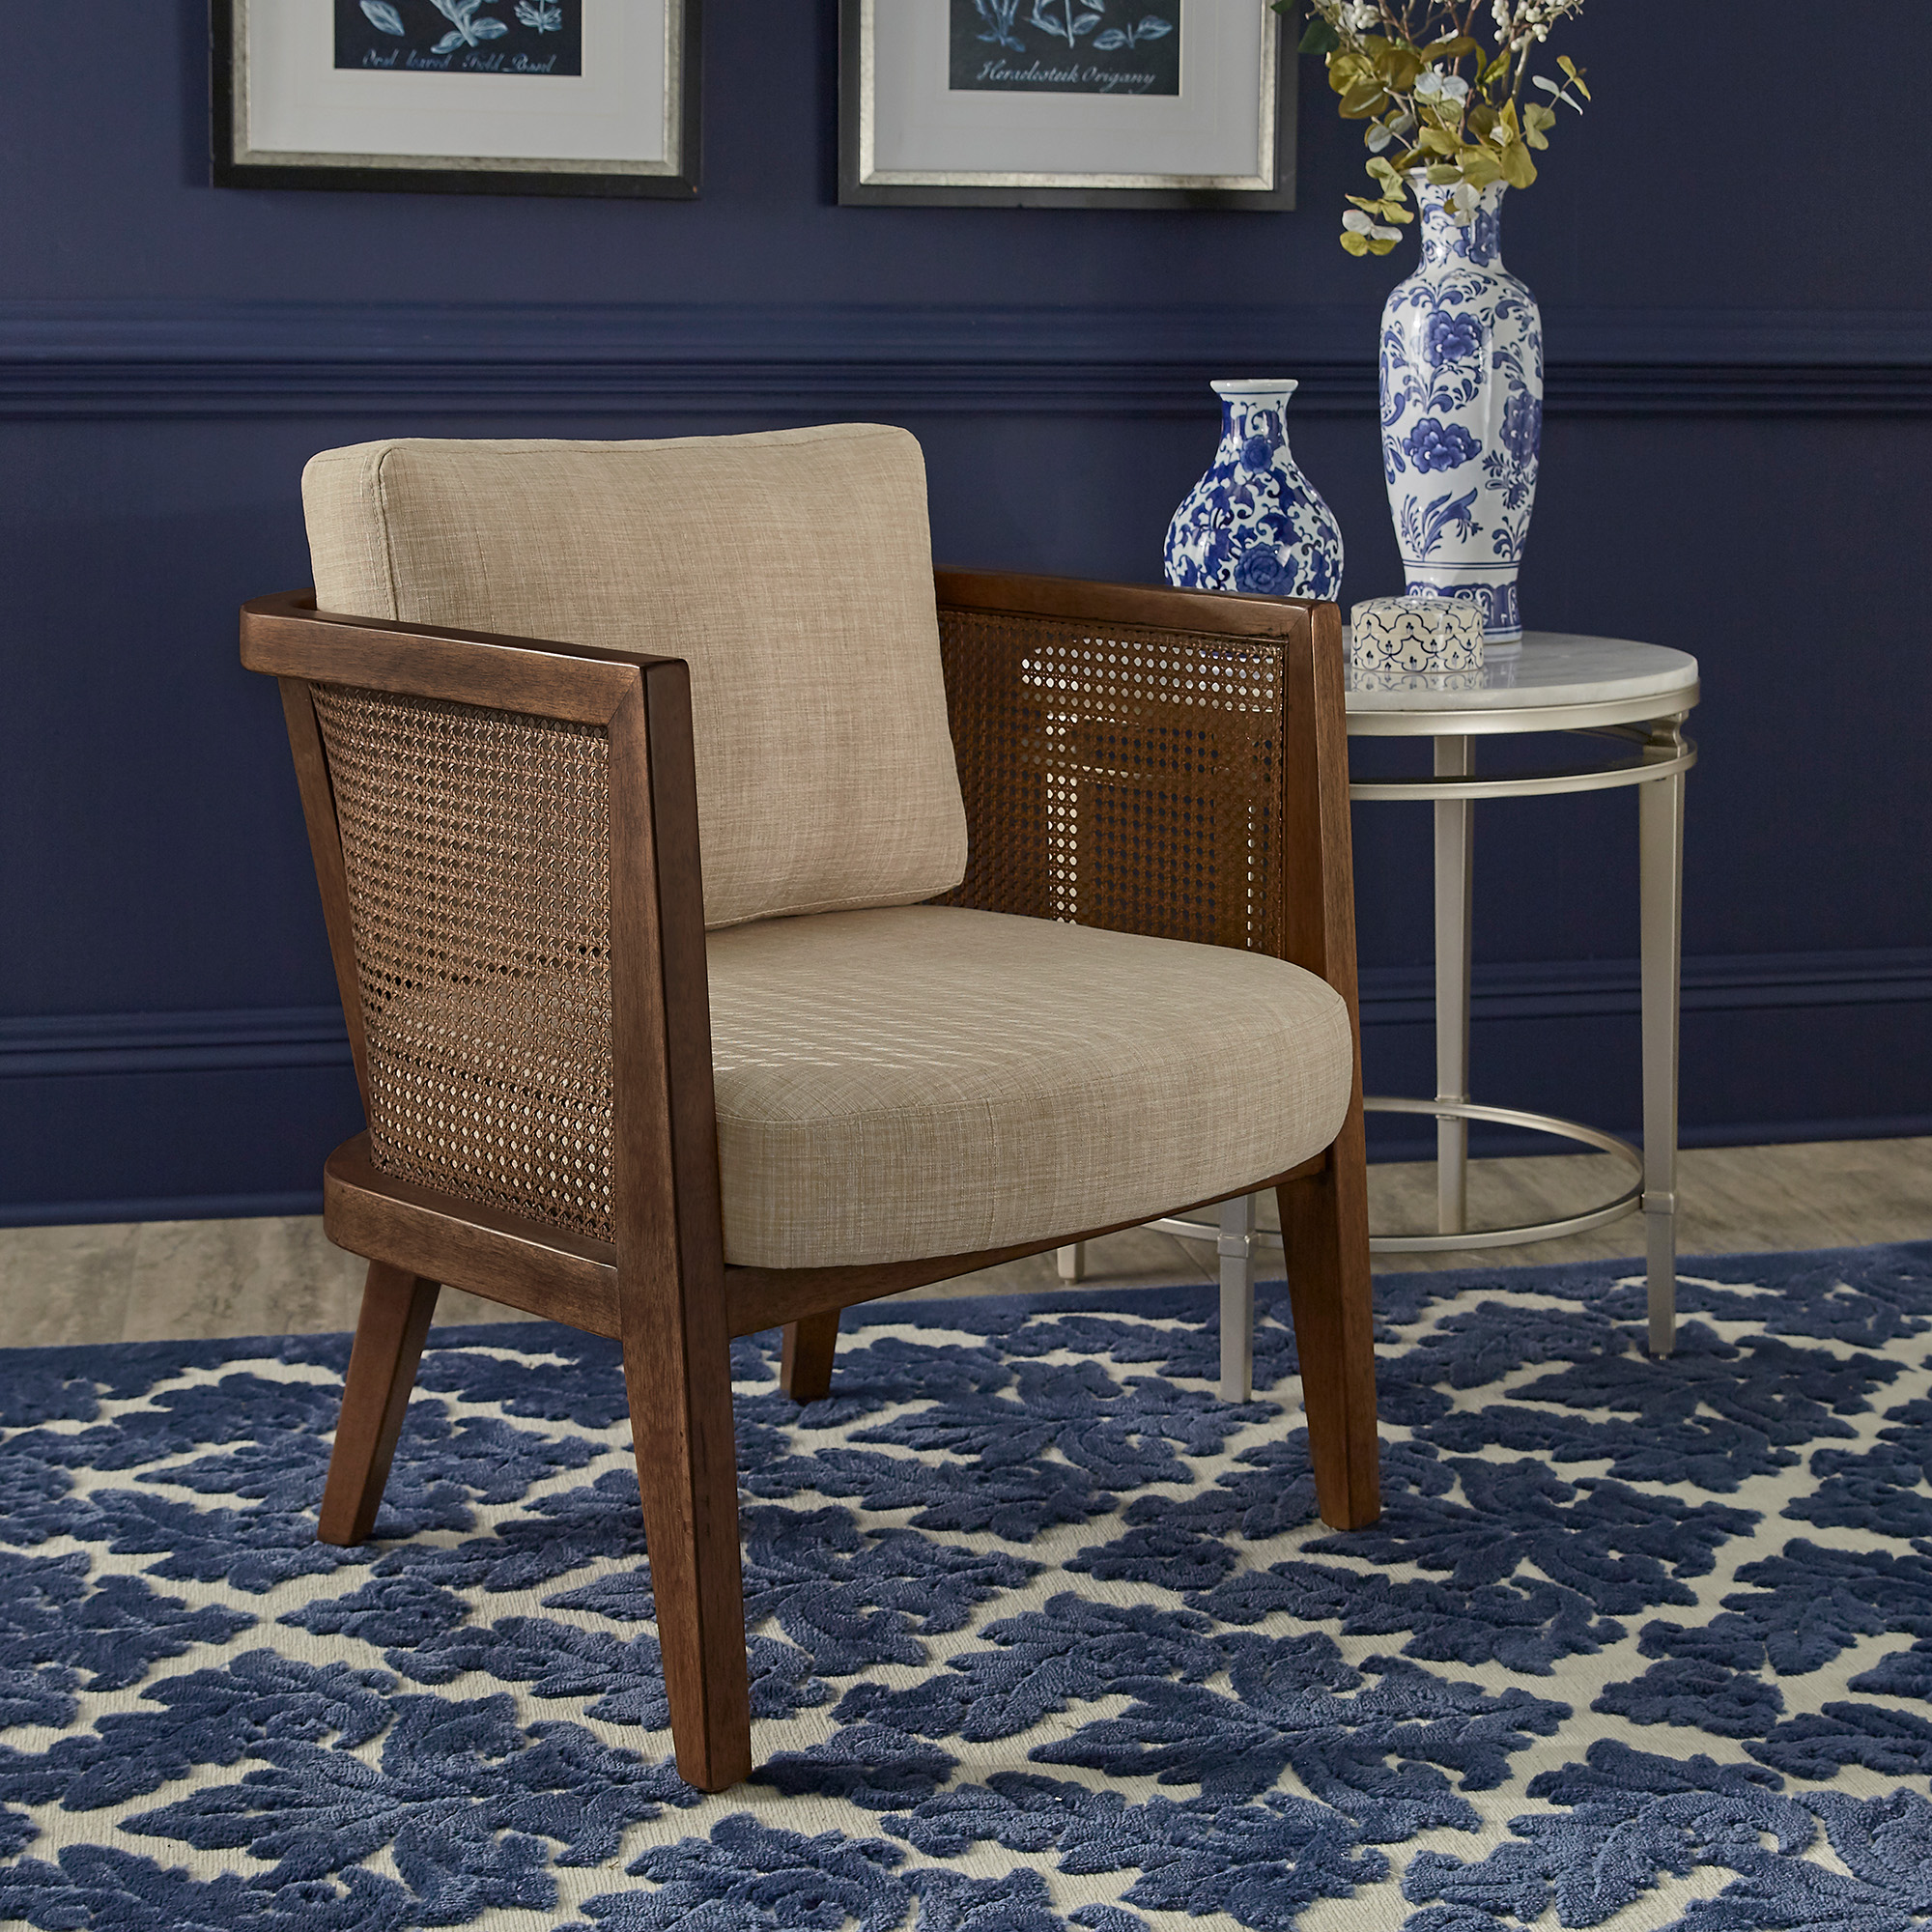 The last of the woods covered in this article is rattan. Pictured here is the Walnut Finish Cane Accent Chair with Beige Linen Upholstered Cushions.